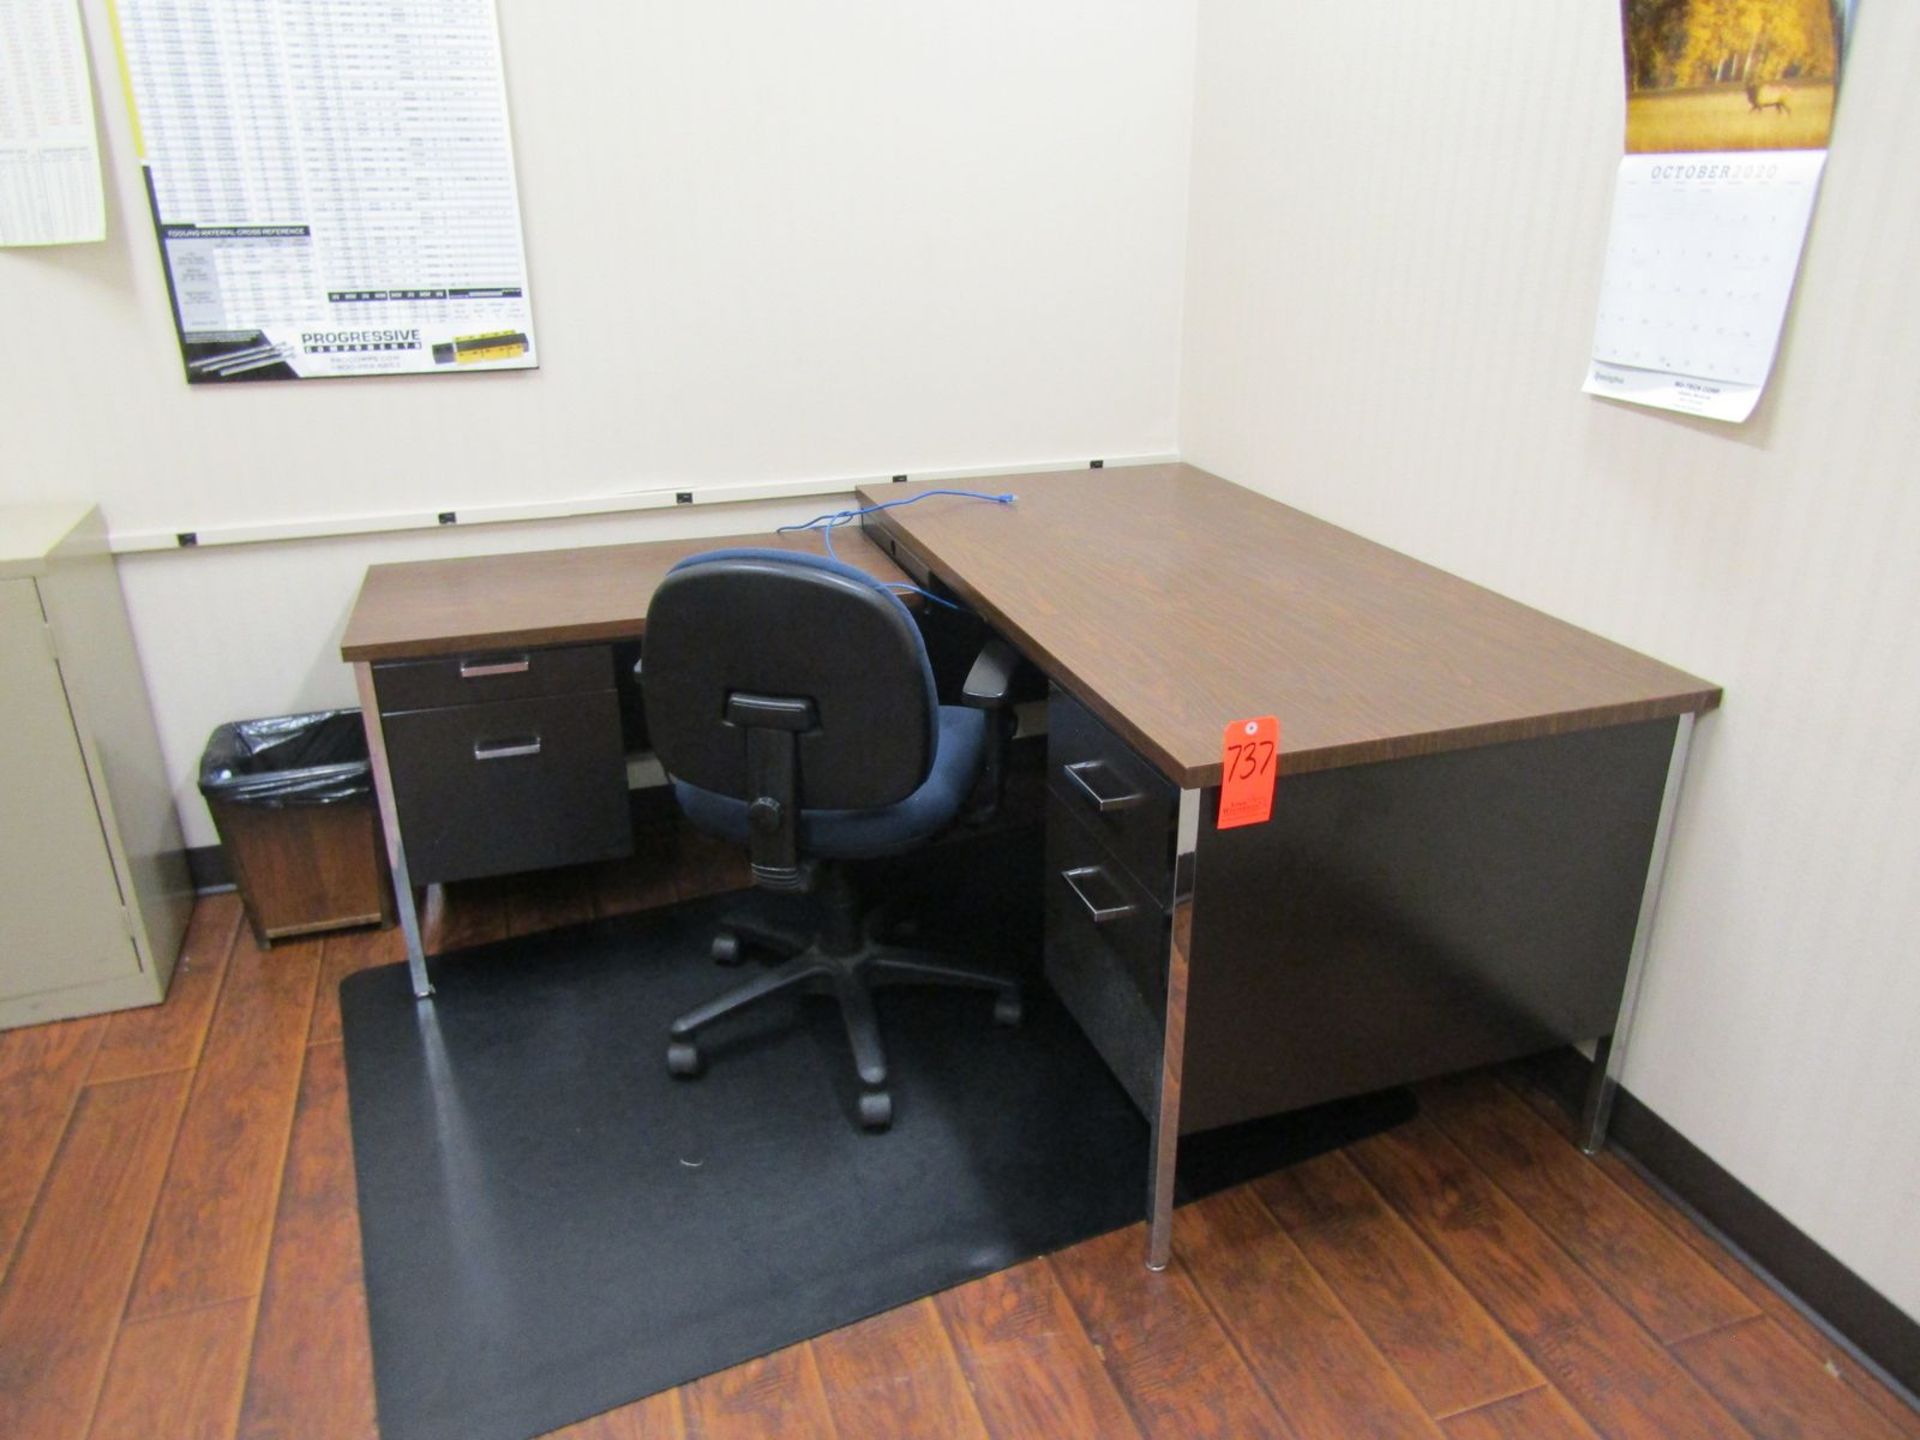 Lot - Contents of Office, to Include: (1) Desk, (1) Credenza, (1) Chair, & (1) Filing Cabinet w/